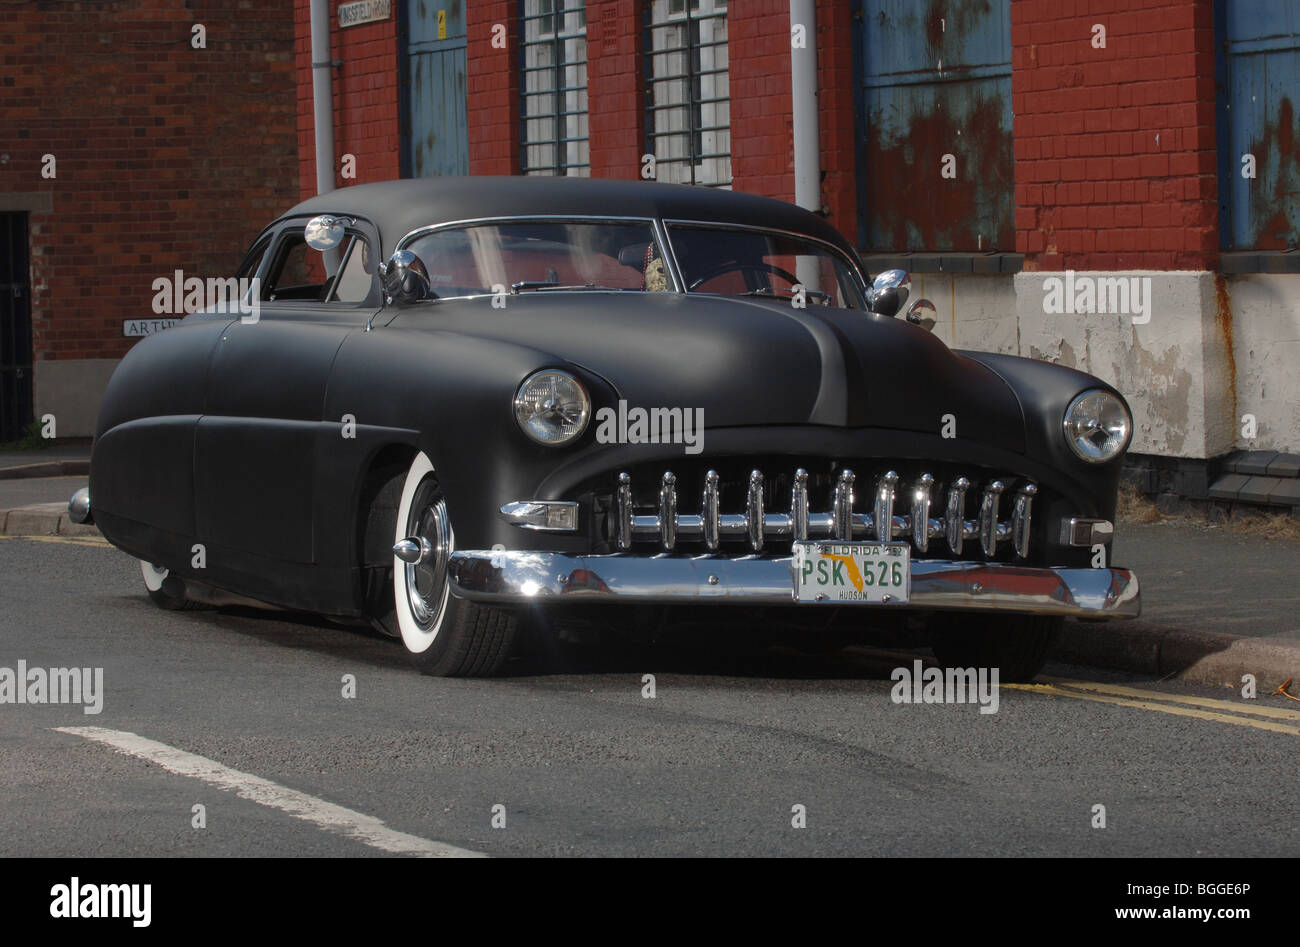 1952 Hudson Leadsled - roof chopped, channeled and slammed hot rod based on a classic American car Stock Photo